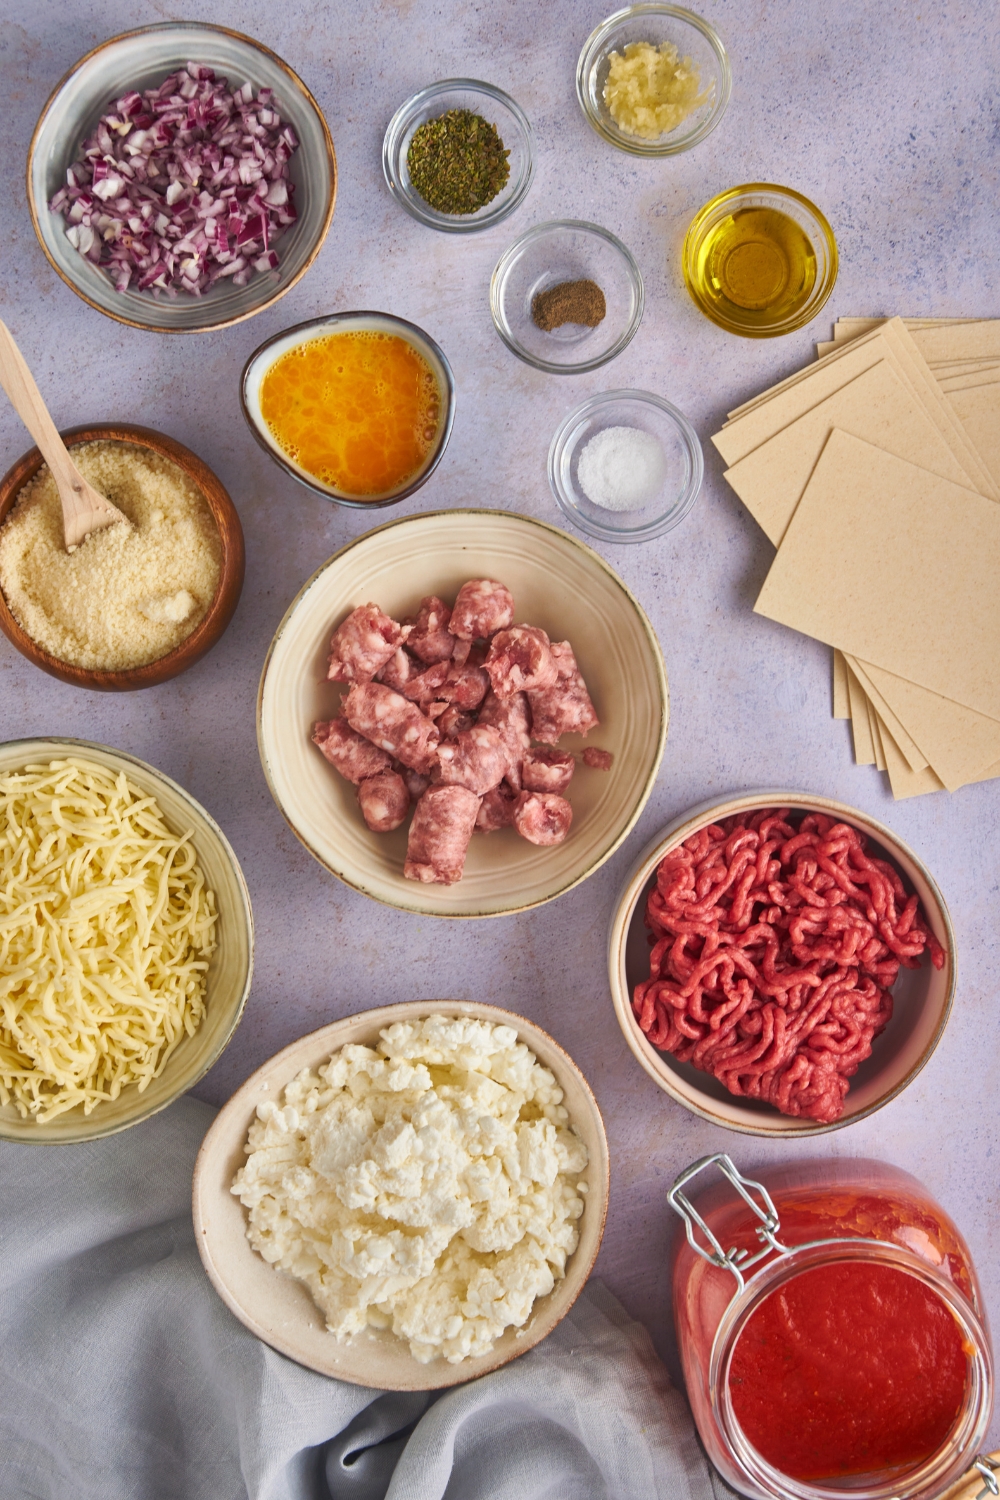 Overhead view of an assortment of ingredients including bowls of ground beef, sausage, diced red onion, garlic, a beaten egg, parmesan cheese, ricotta cheese, and tomato sauce.